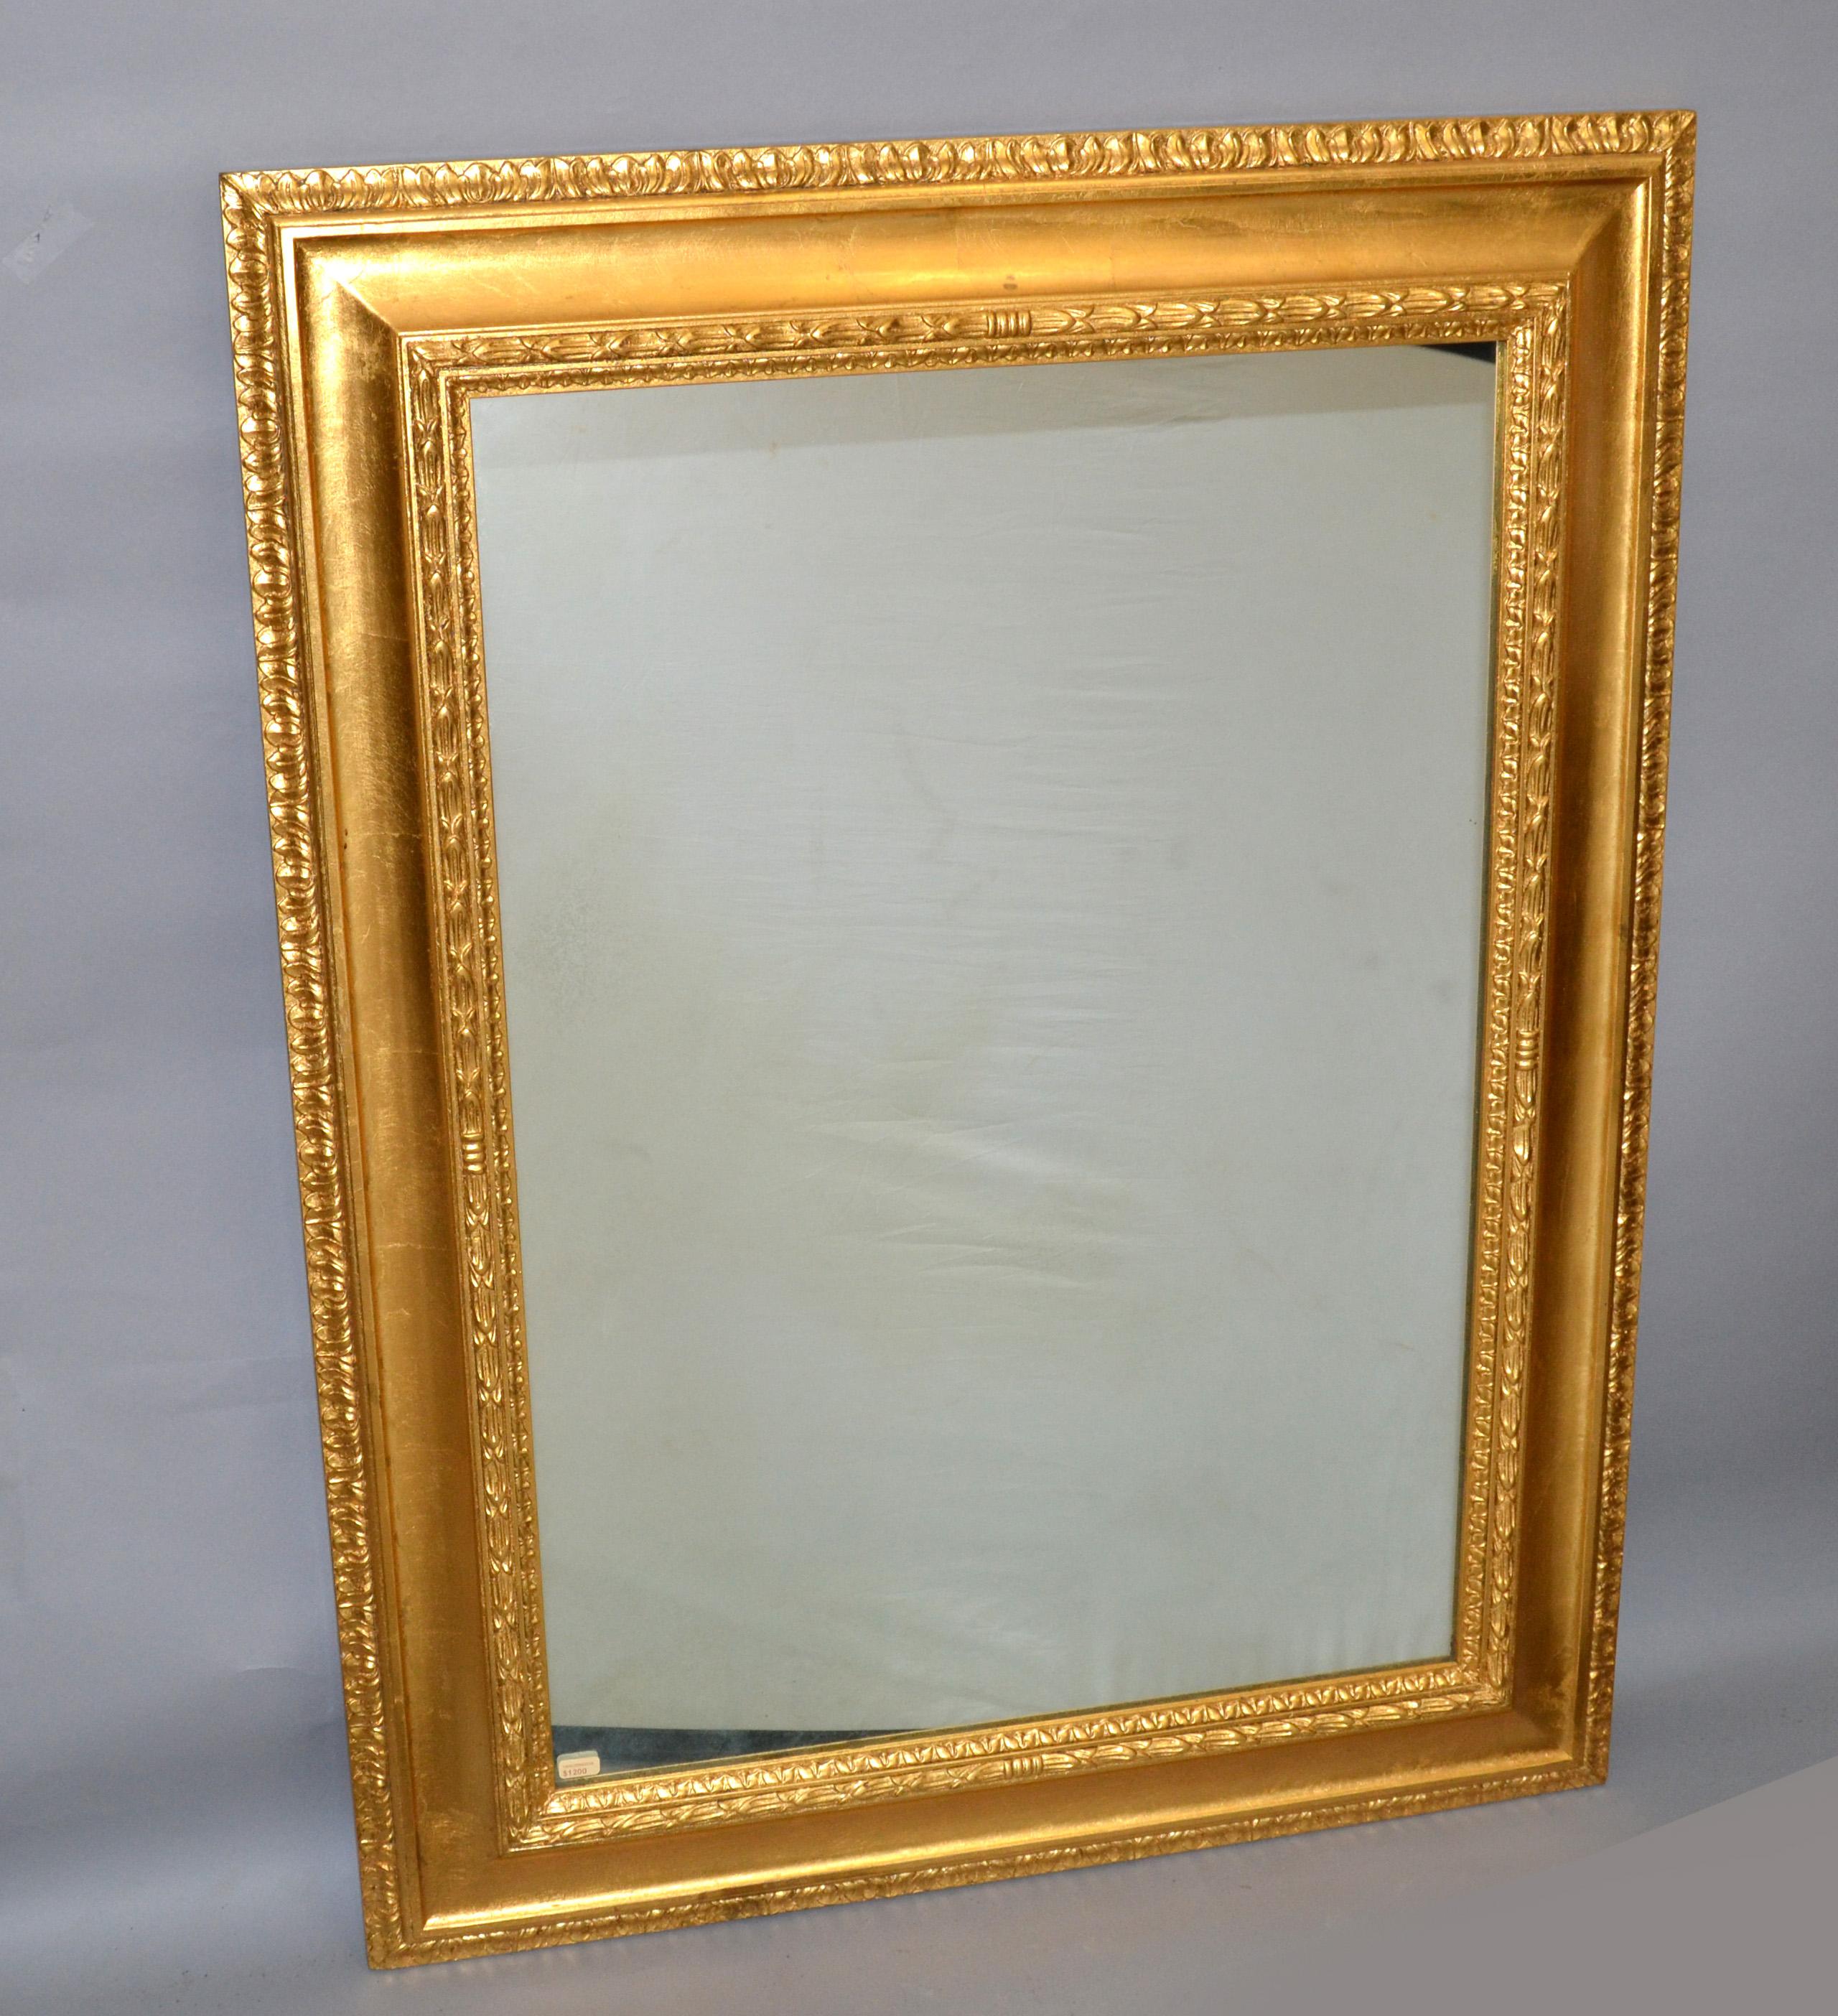 Neoclassical Regency rectangle Gilded wall mirror with fine detailing in the frame, made in Italy, 1930.
The Backing is solid wood, and it has some weight to it.
Can be hung securely with the wire in the back.
Some foxing to the Mirror